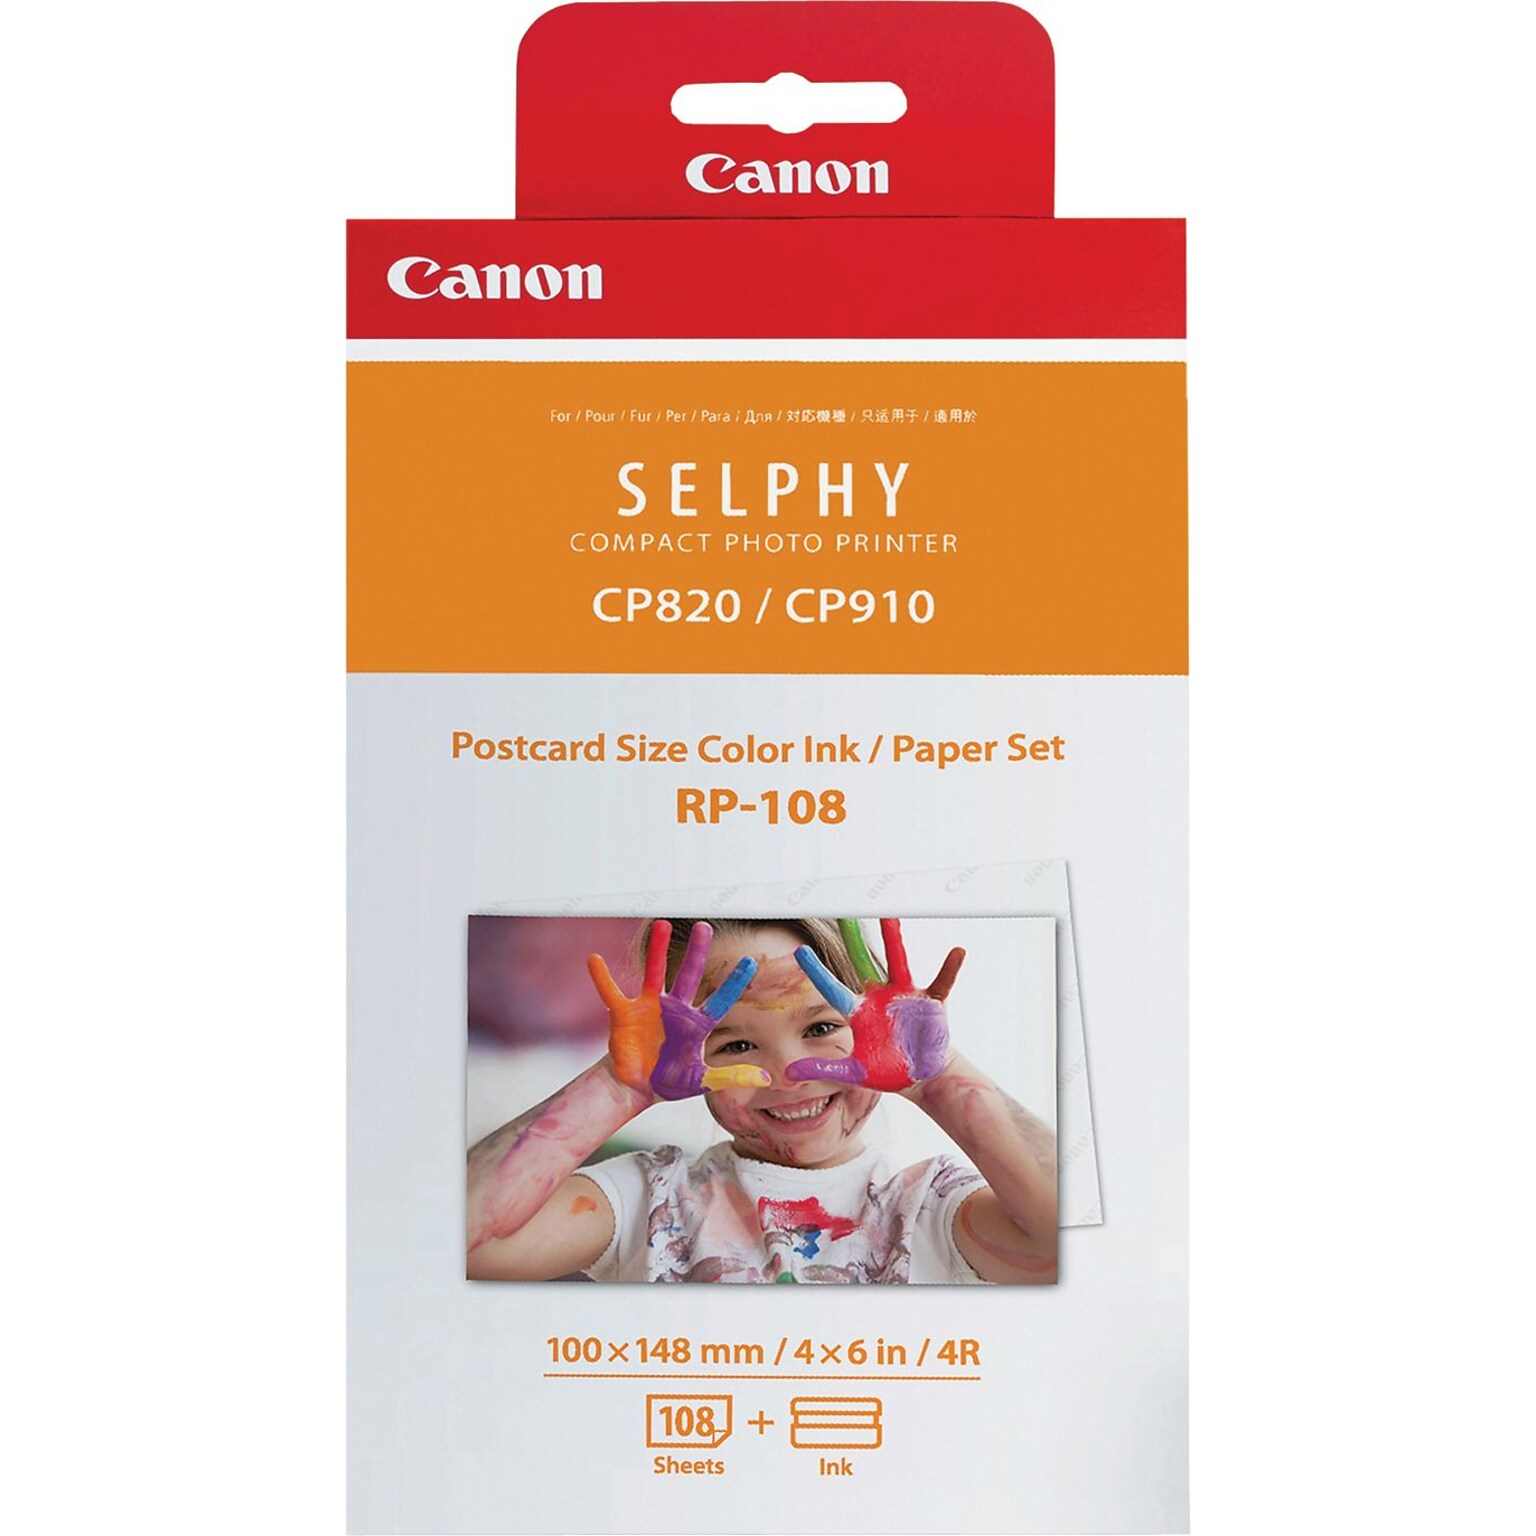 Canon RP-108 High-Capacity Color Ink/Paper Set, 4 x 6, 108 sheets